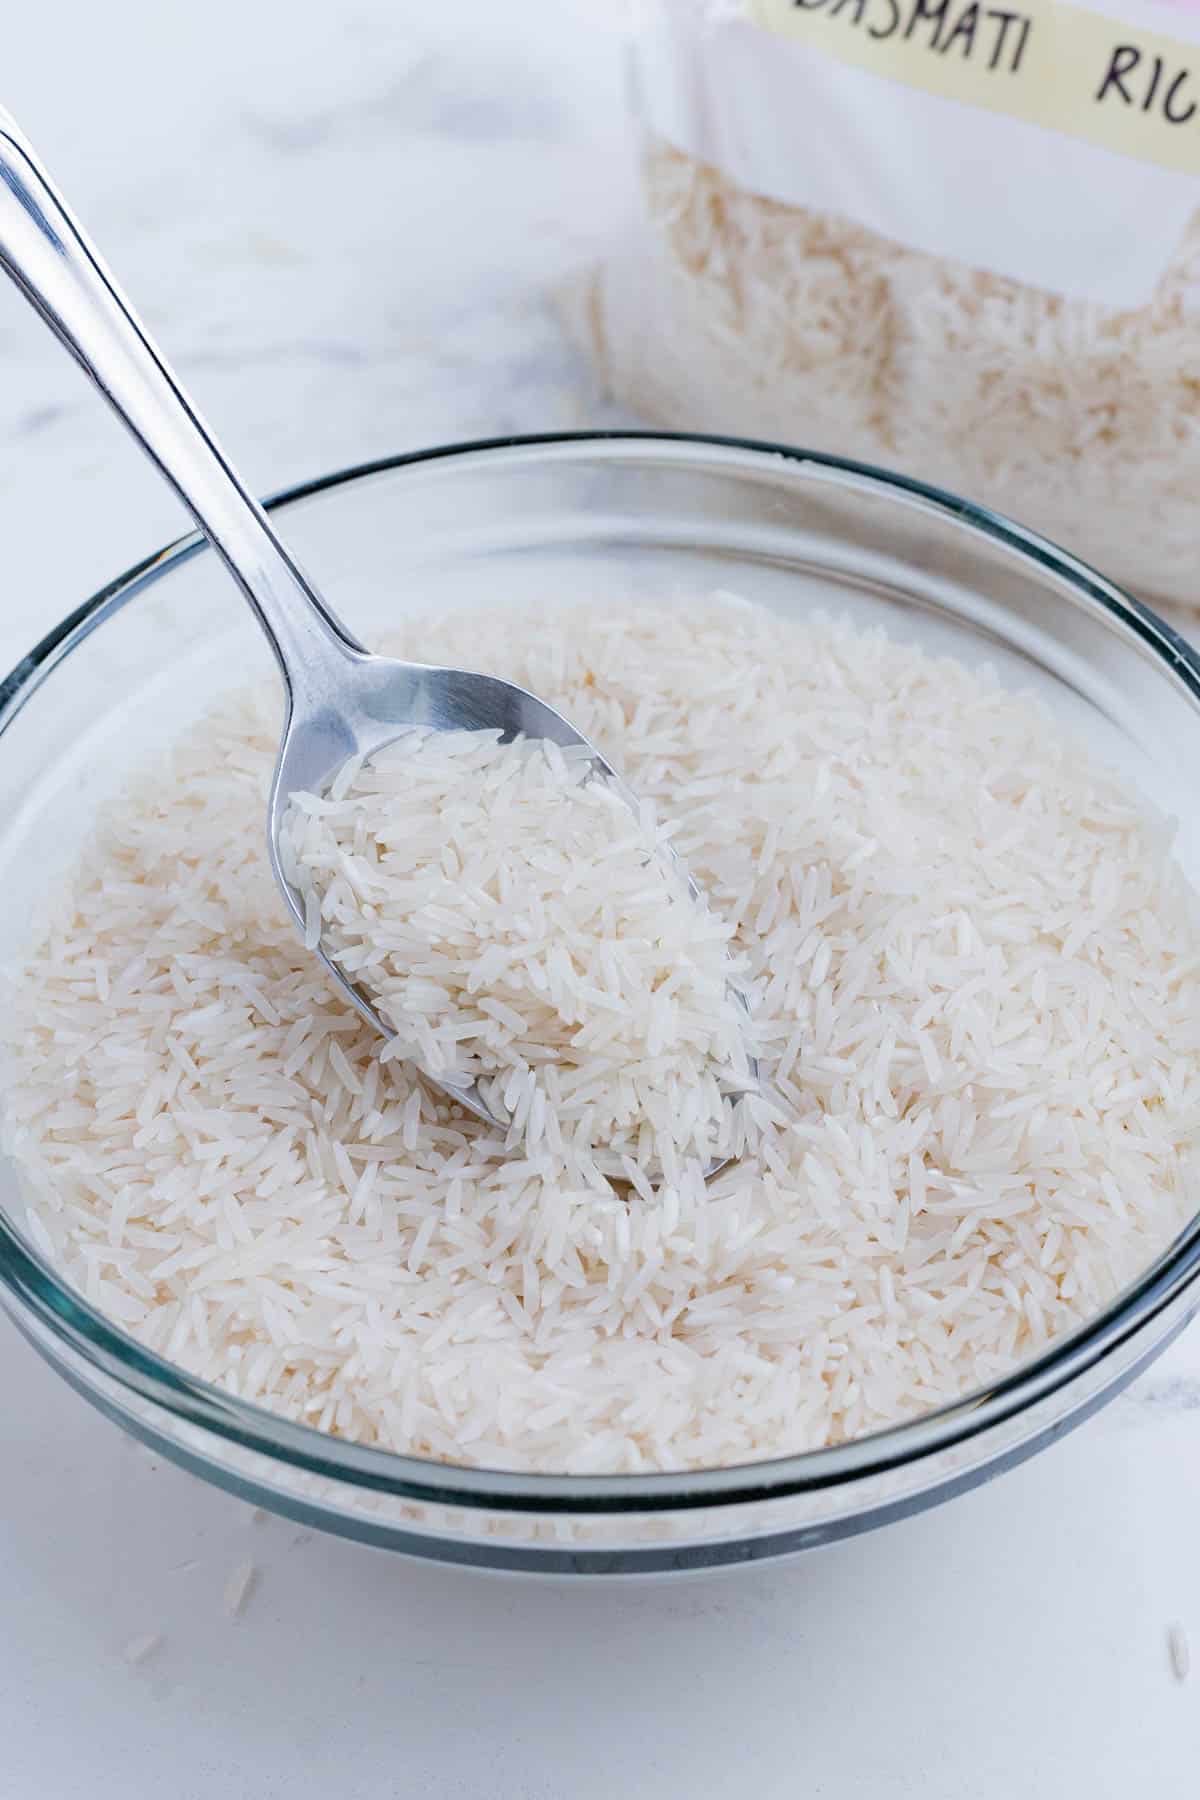 A spoon scoops Basmati rice out of a glass bowl.